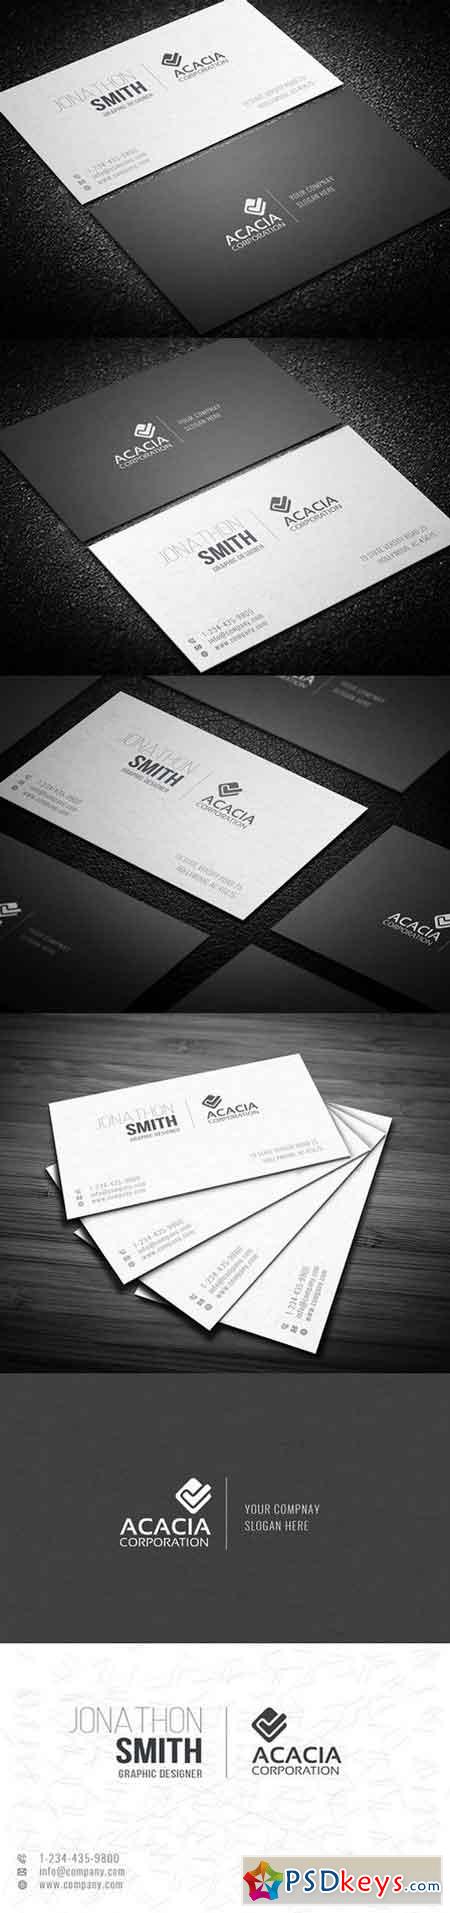 Simple and Elegant Business Card-02 889839